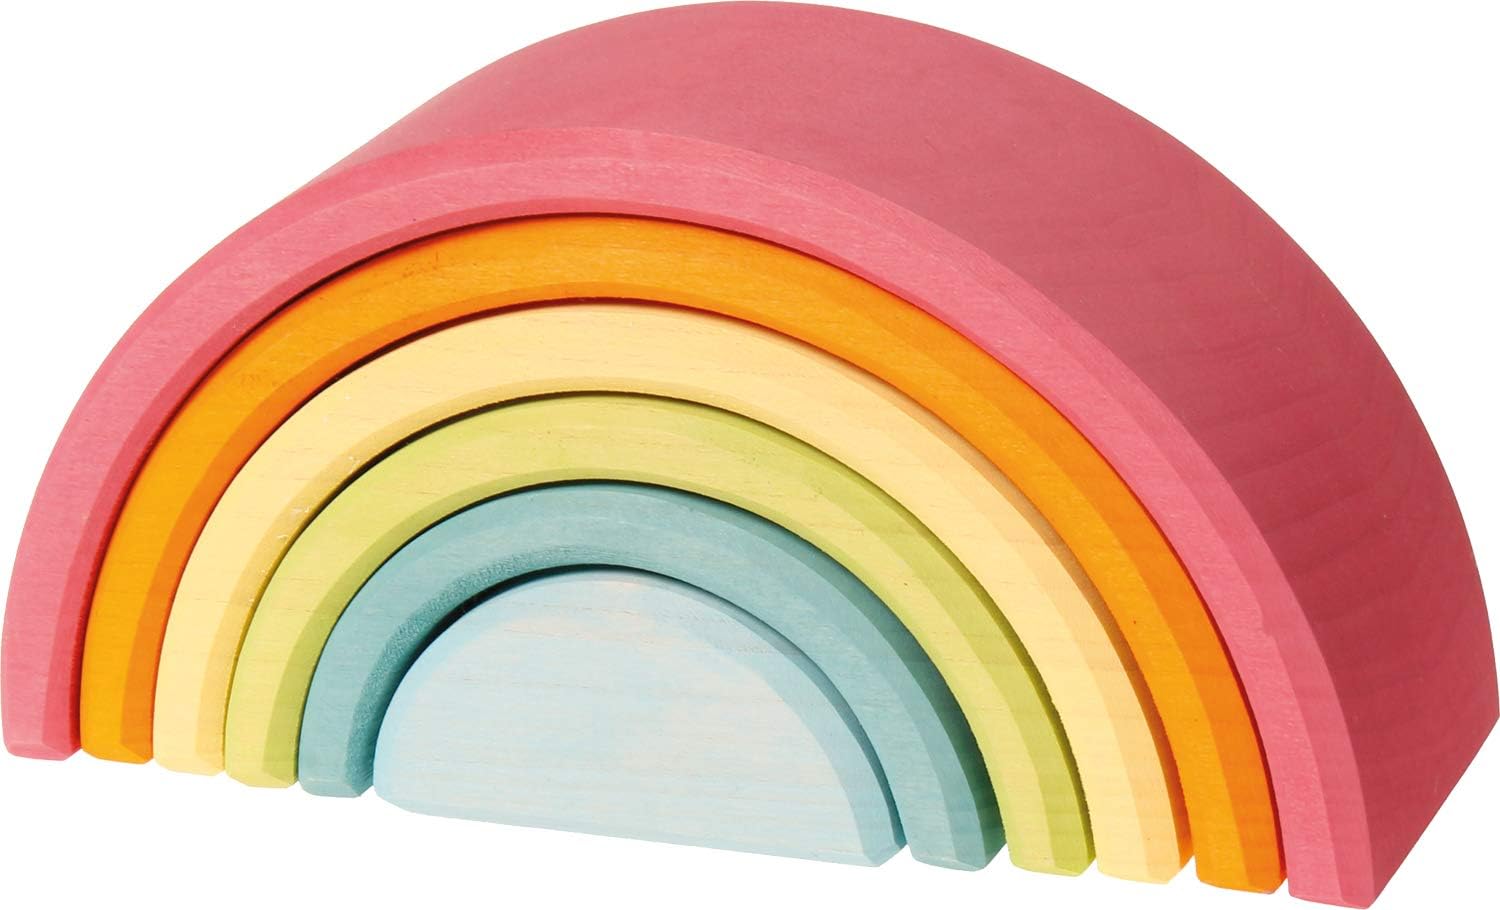 Grimm's Spiel and Holz Design Large 6-Piece Pastel Rainbow Stacker, Open-Ended Wooden Nesting & Stacking